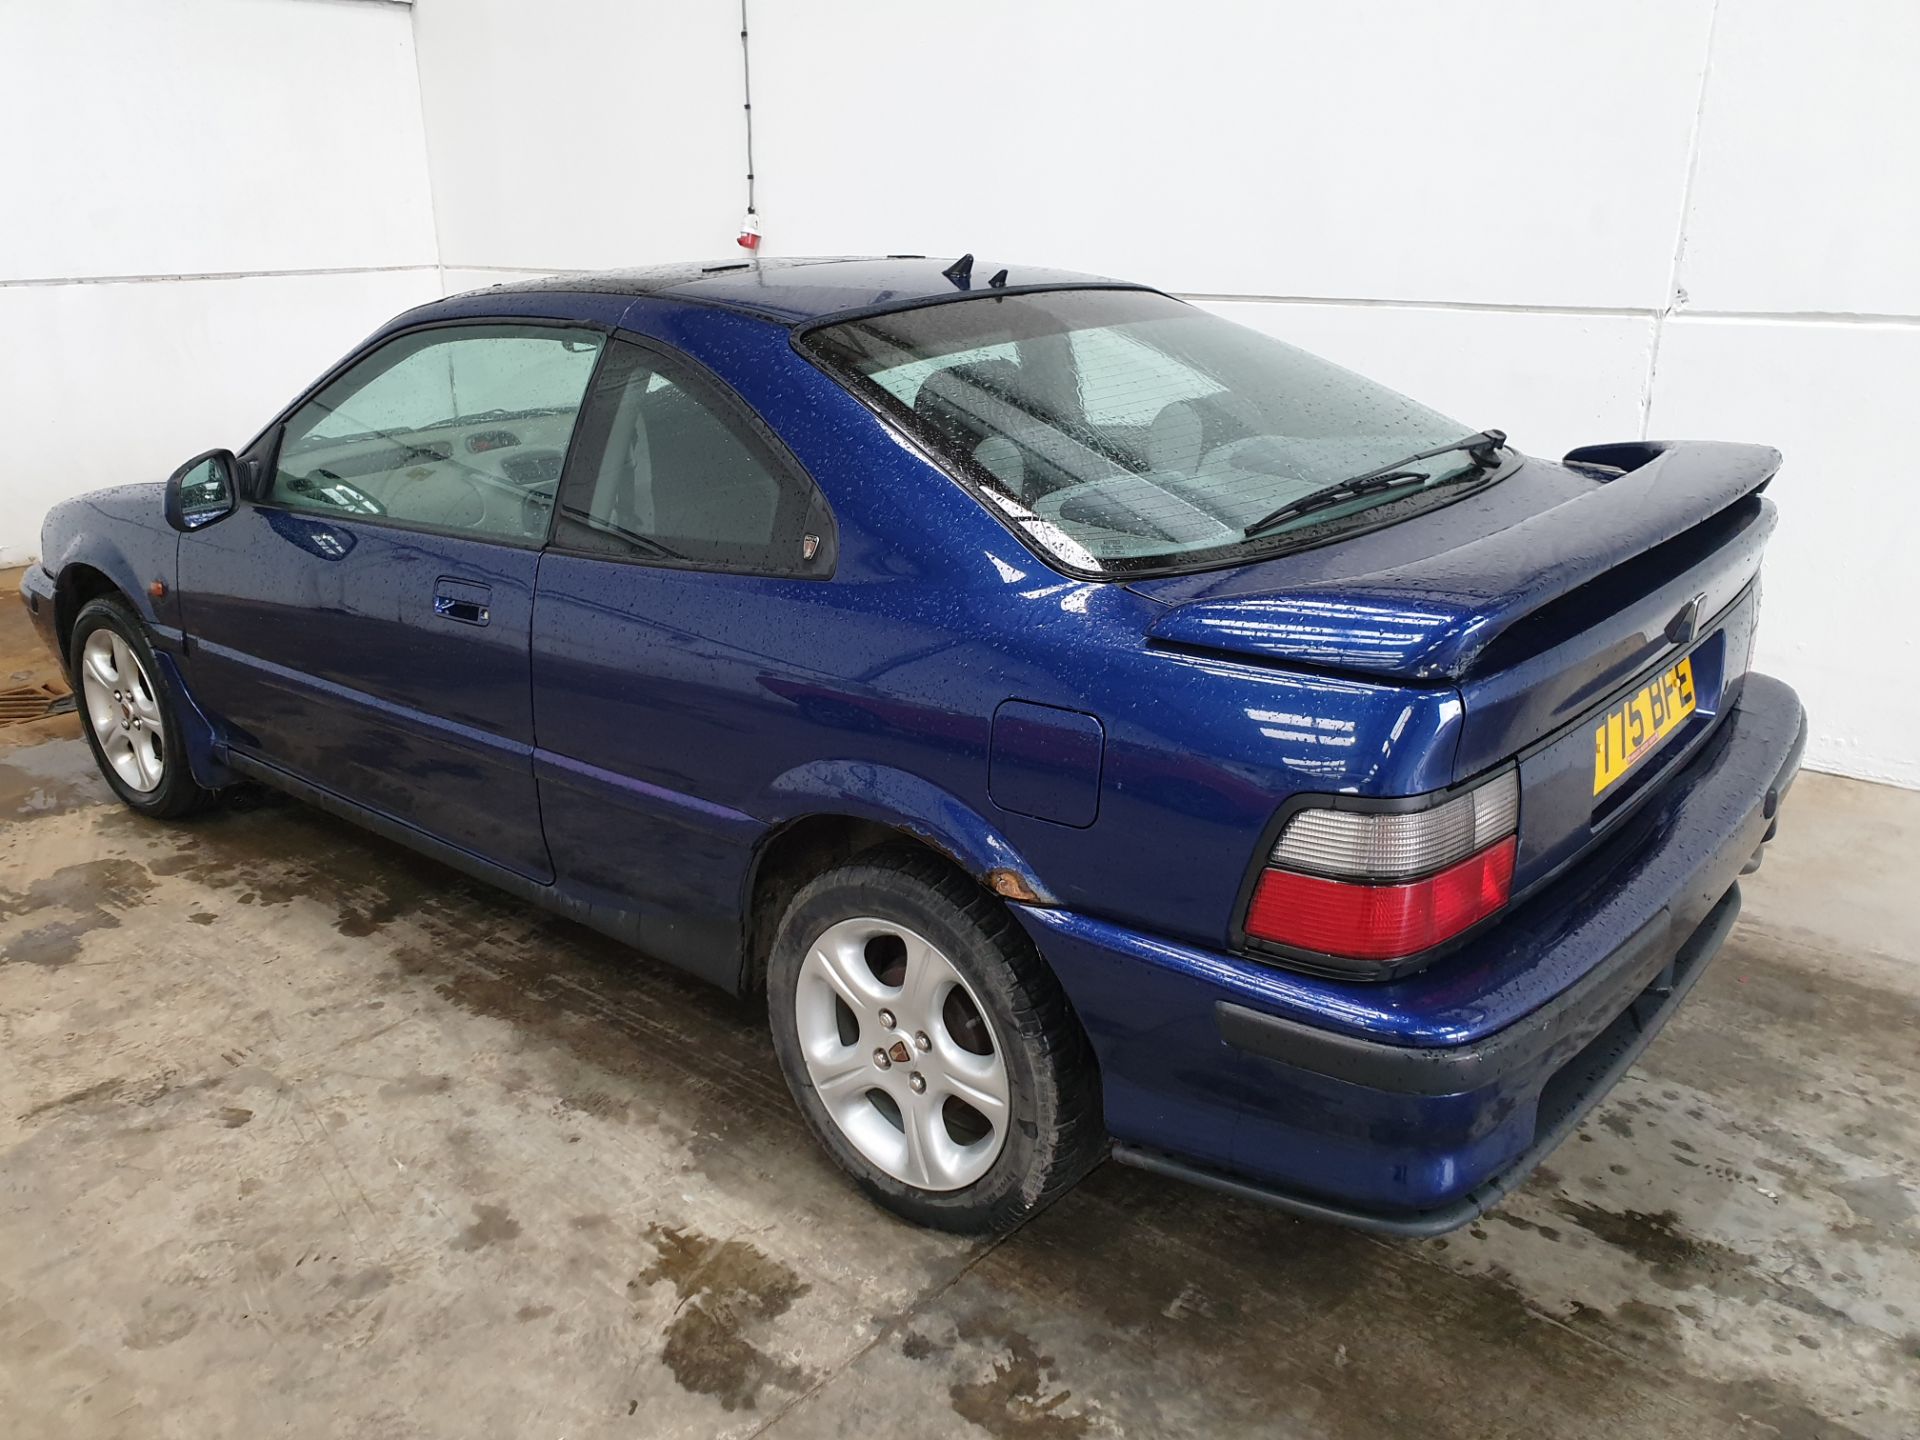 1998 Rover 216 Coupe SE - Image 5 of 11